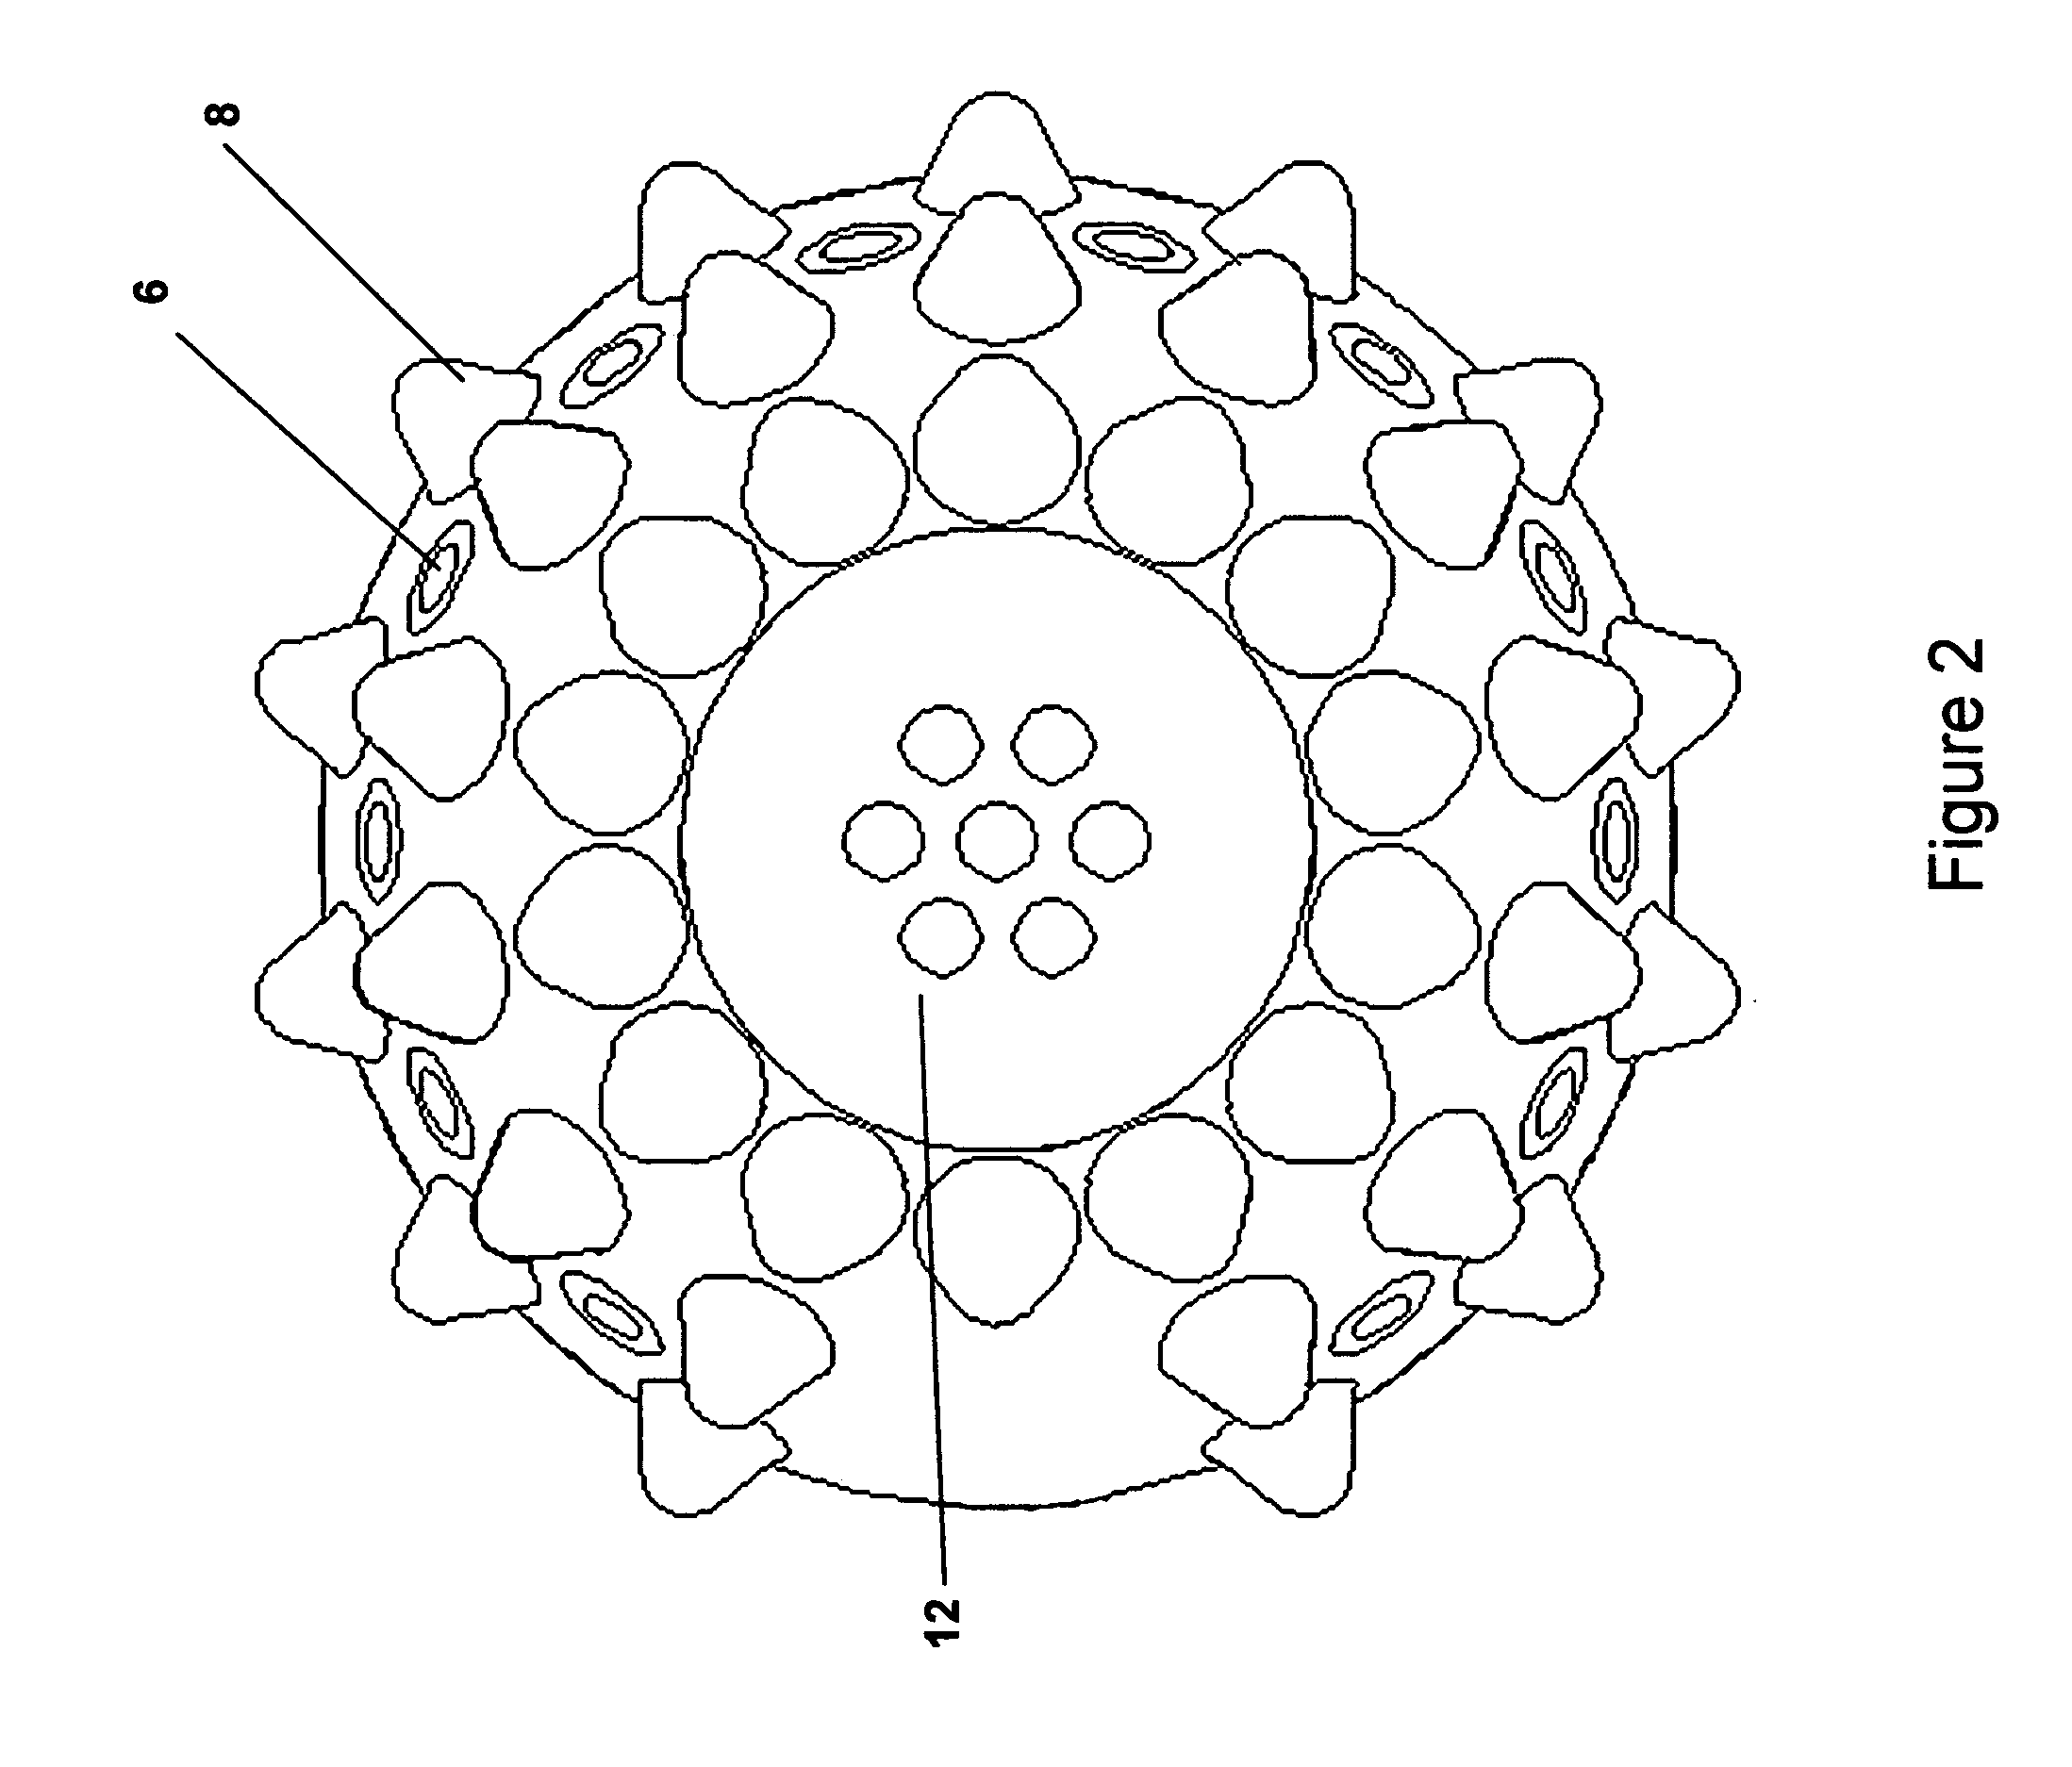 Environmentally sensitive multi-use apparatus for administering and dispensing laundry additives